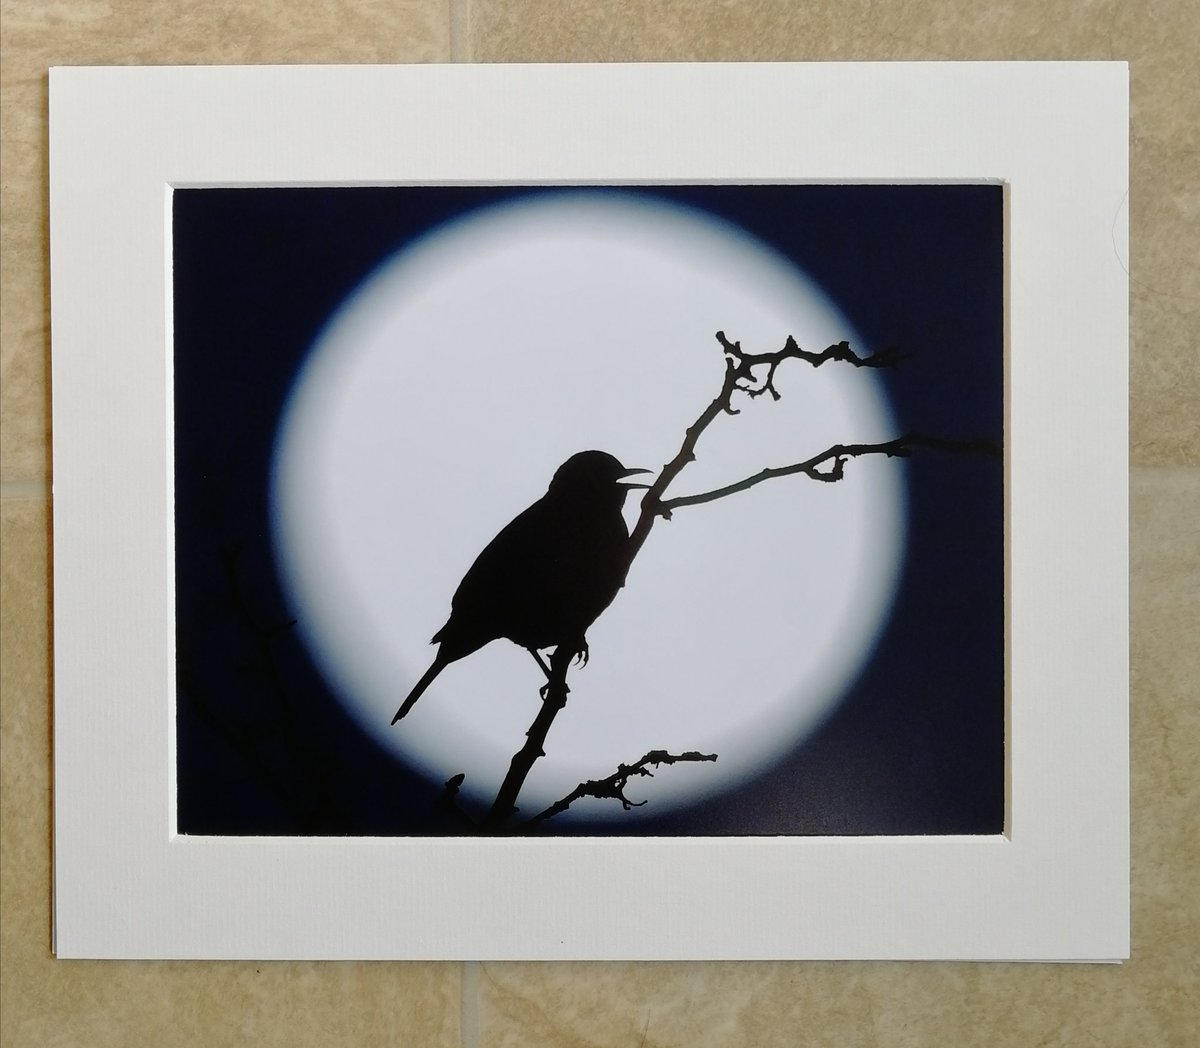 'Blackbird Moon' 10x8 mounted print. You can buy it here; https://www.carlbovis.com/product-page/blackbird-moon-10x8-mounted-print 